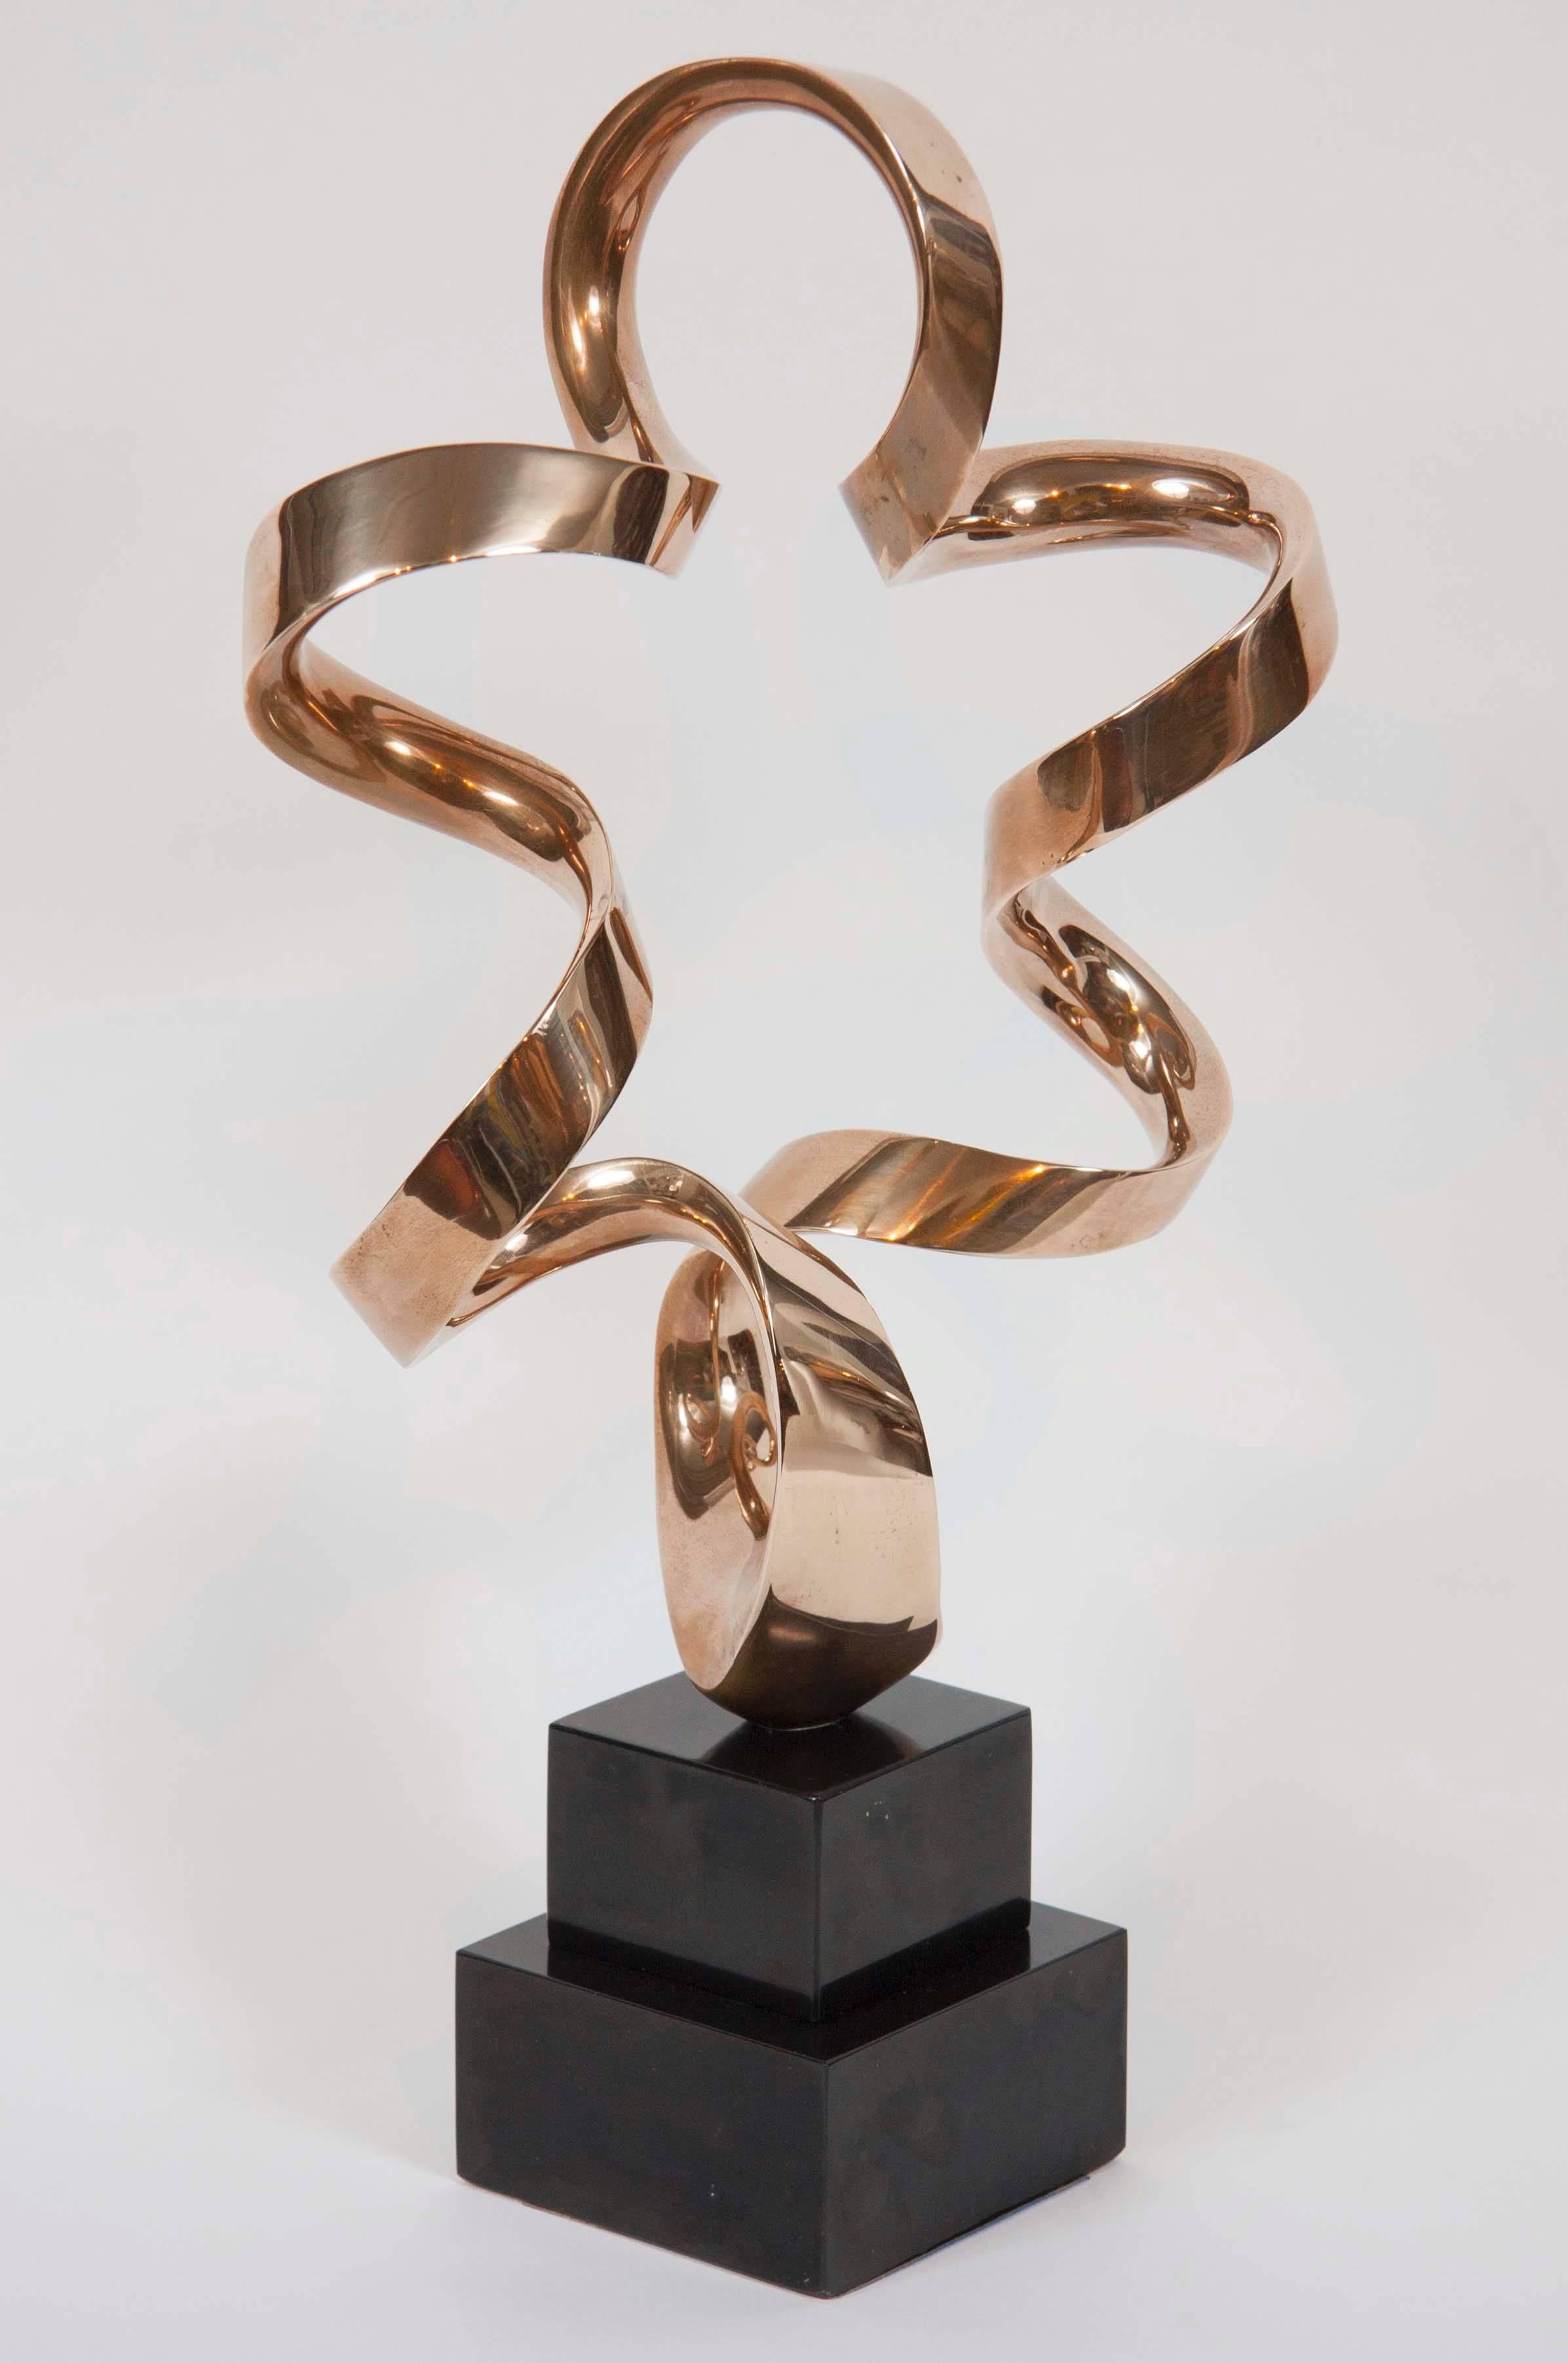 An attractive bronze sculpture on a marble plinth by Antonio Kieff. Signed 2 of 6.